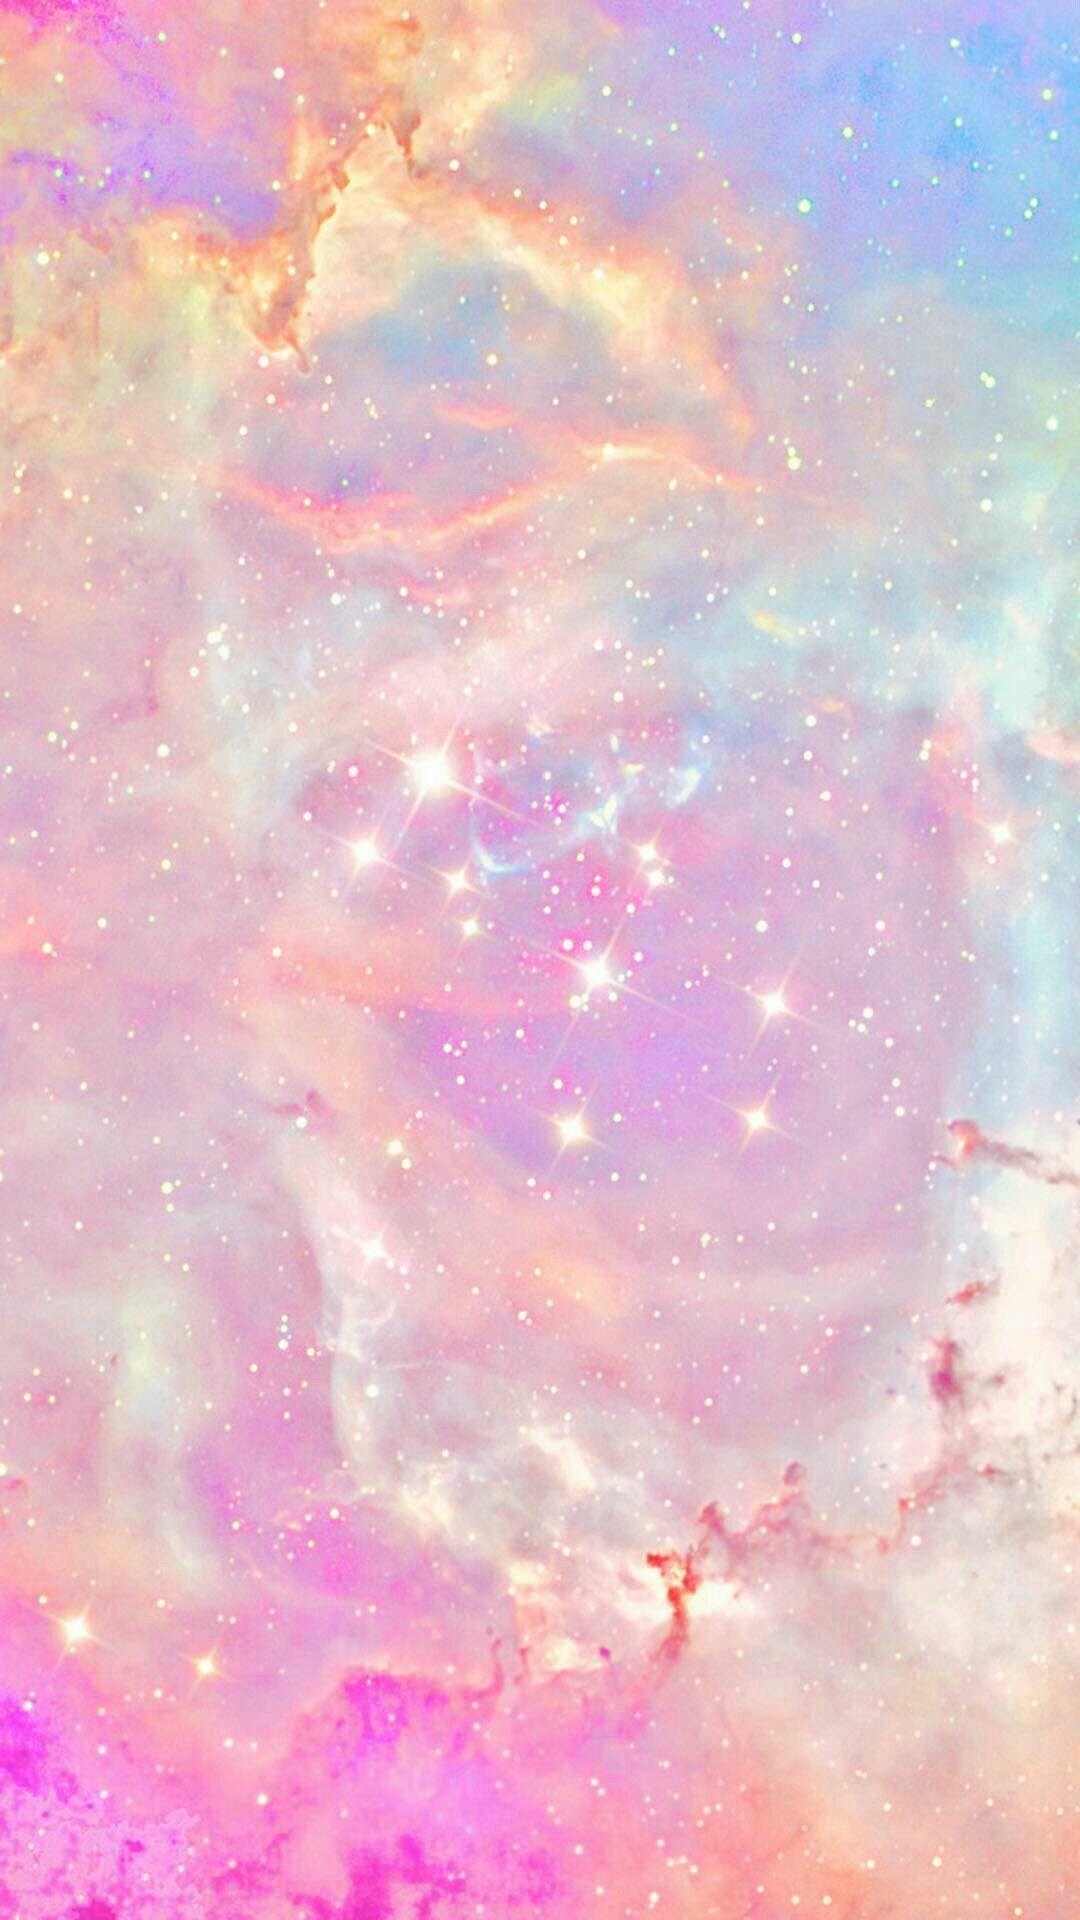 Aesthetic background of a colorful galaxy - Iridescent